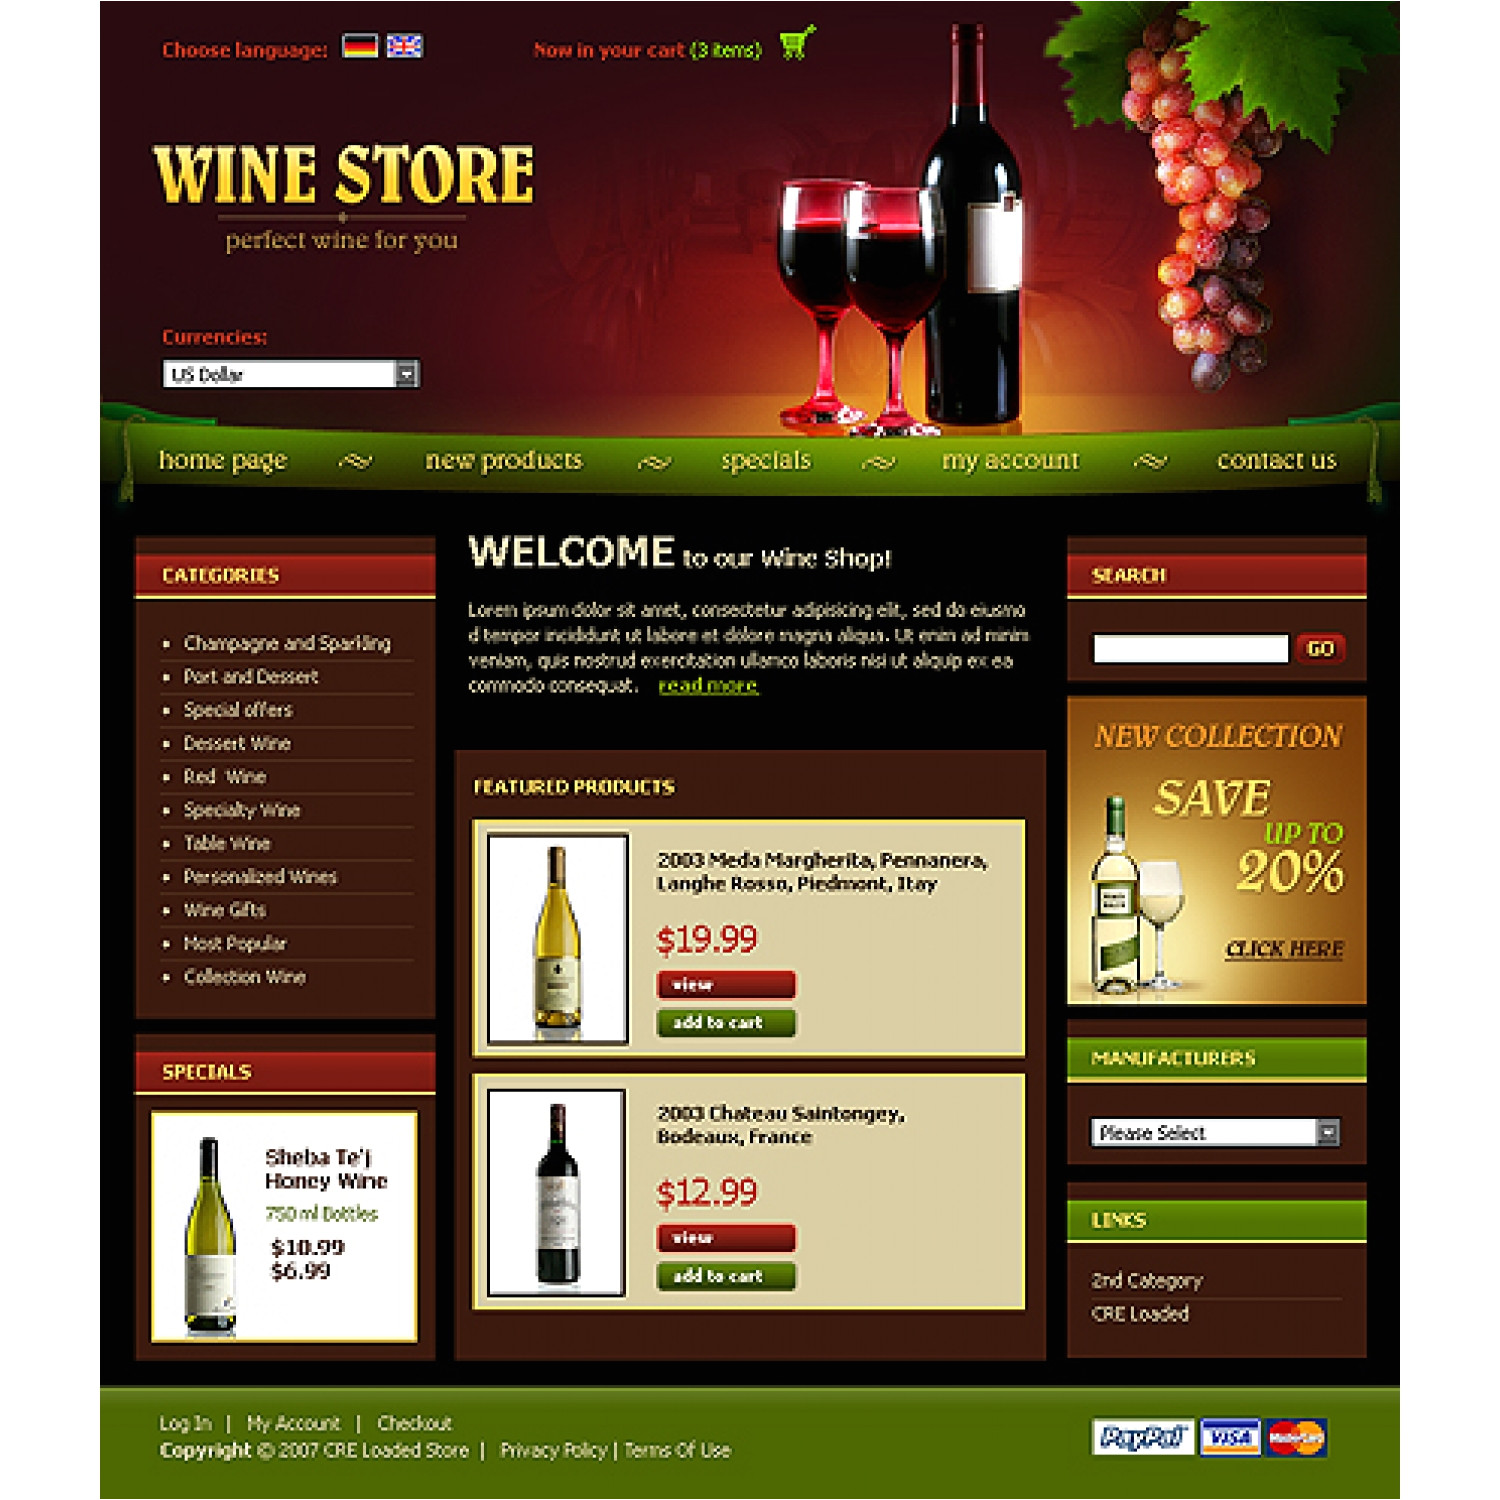 wine shop 15282 cre loaded template